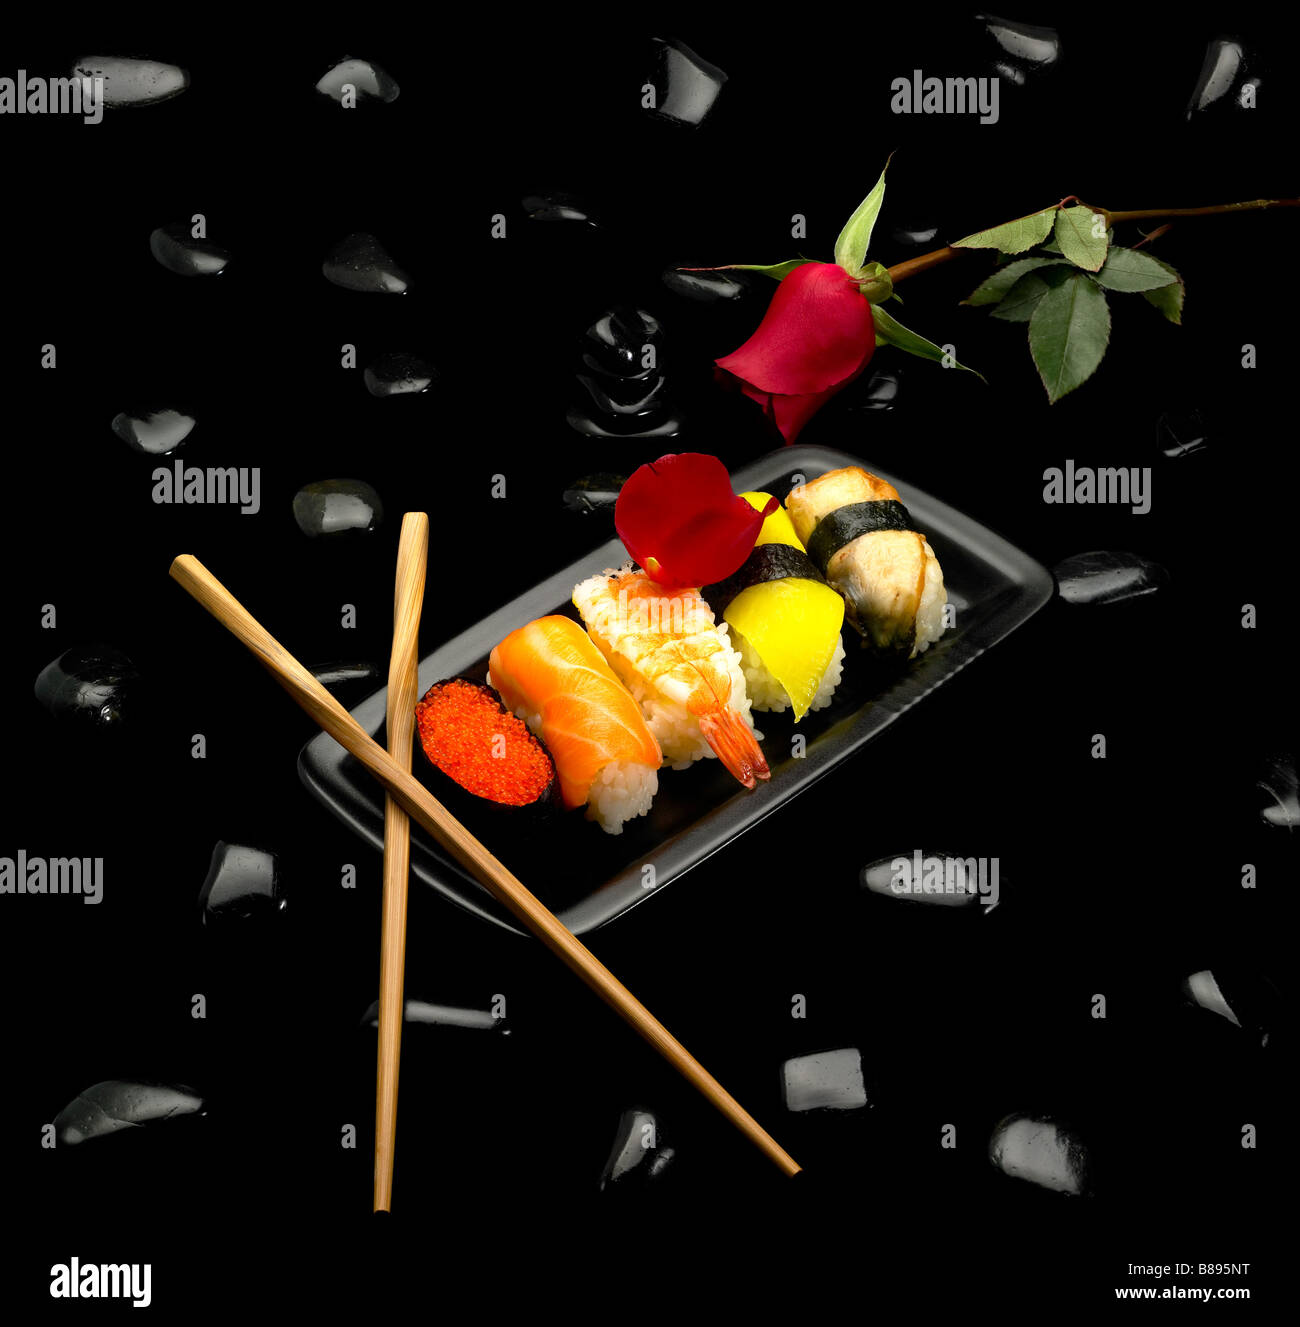 assorted sushi plate with a red rose on black pebbles over black background Stock Photo